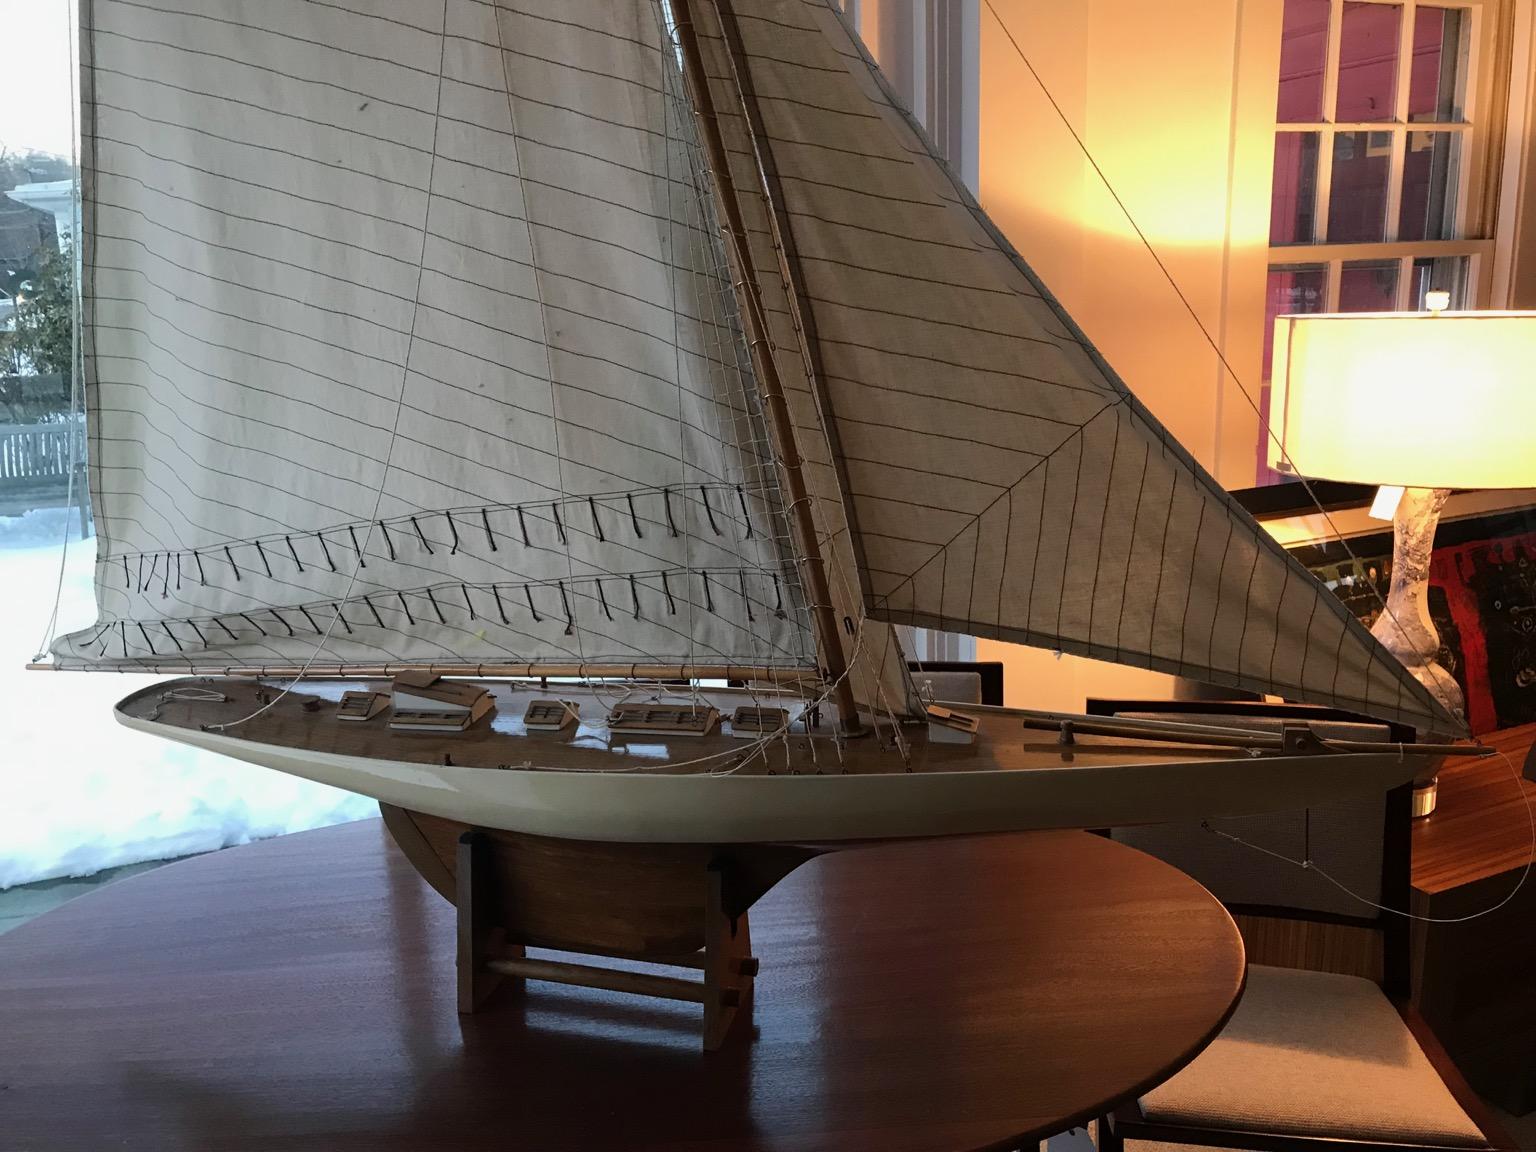 Impressive model sailboat with accurate sails and lines! This exceptional model stands 66